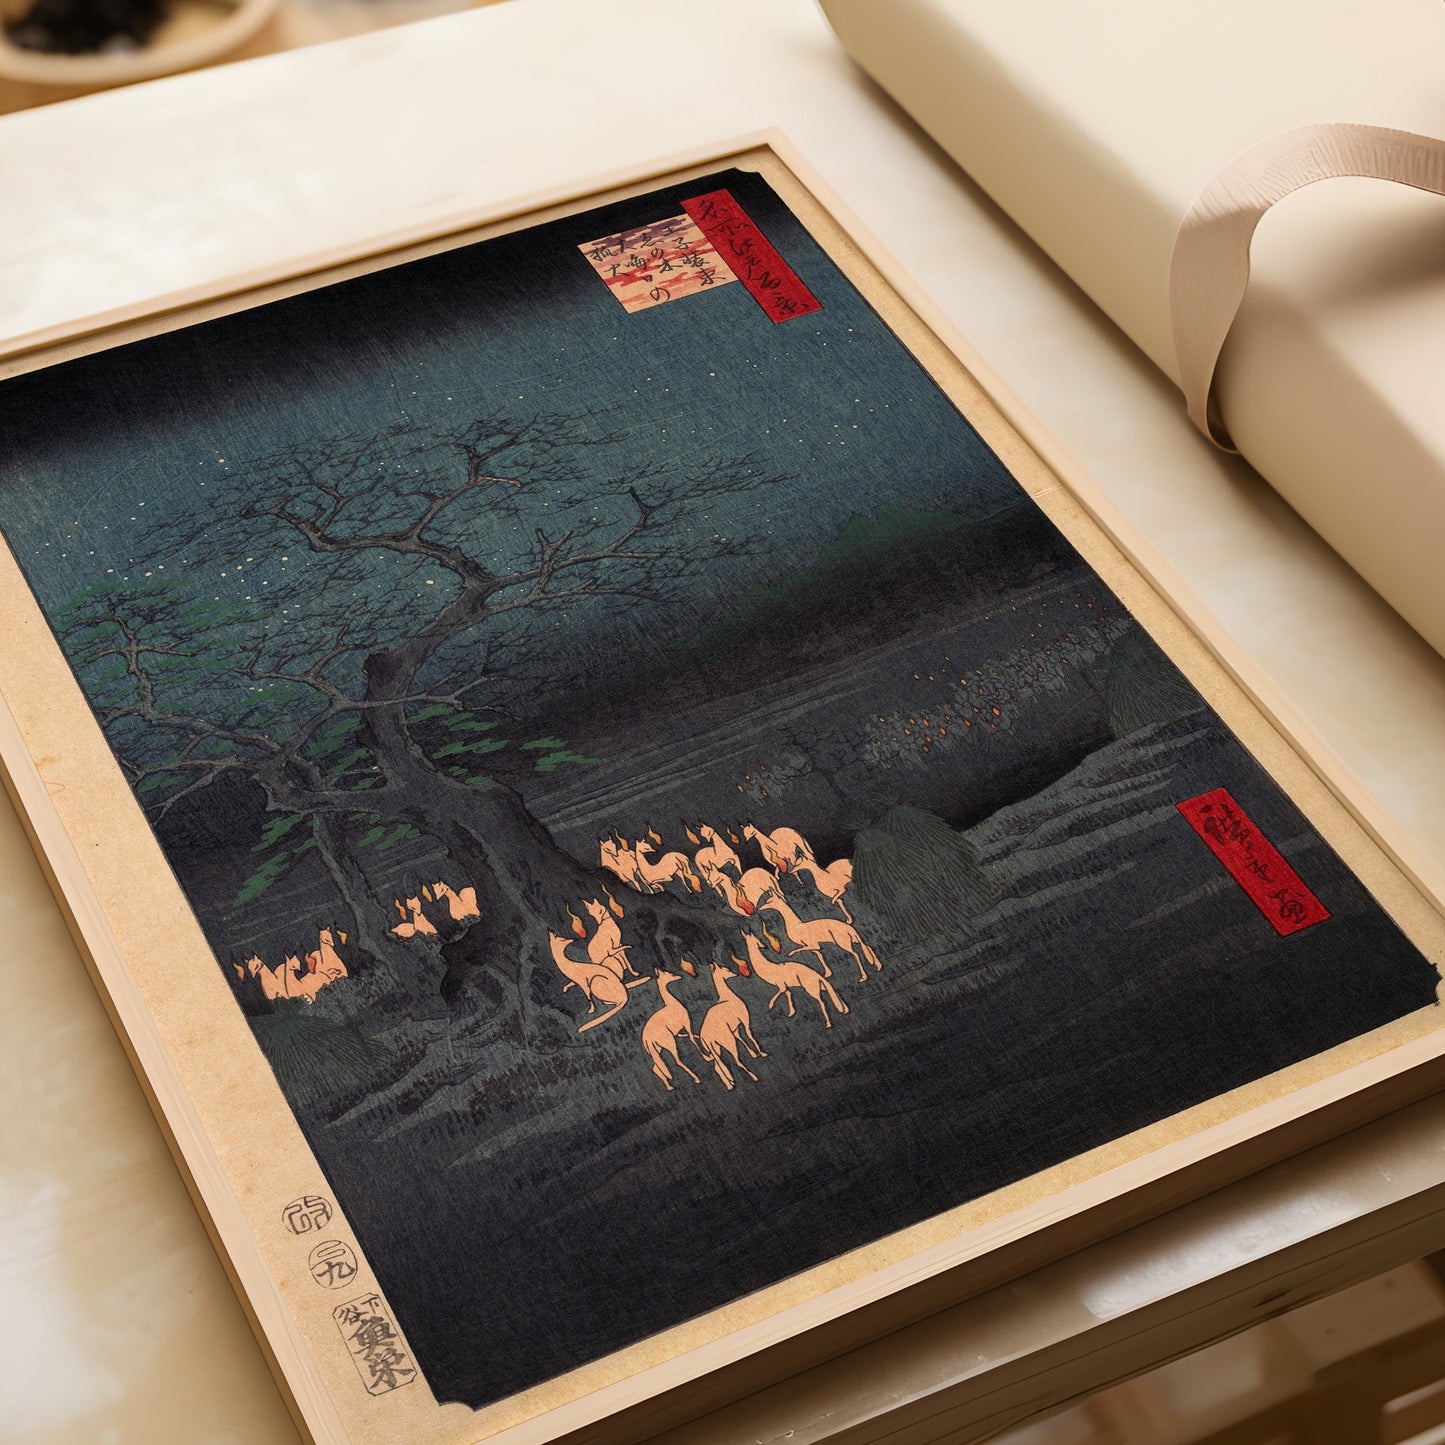 Utagawa Hiroshige - New Year's Eve Foxfire at the Hackberry Tree | Japanese Vintage Neutral Sketch Art (available framed or unframed)